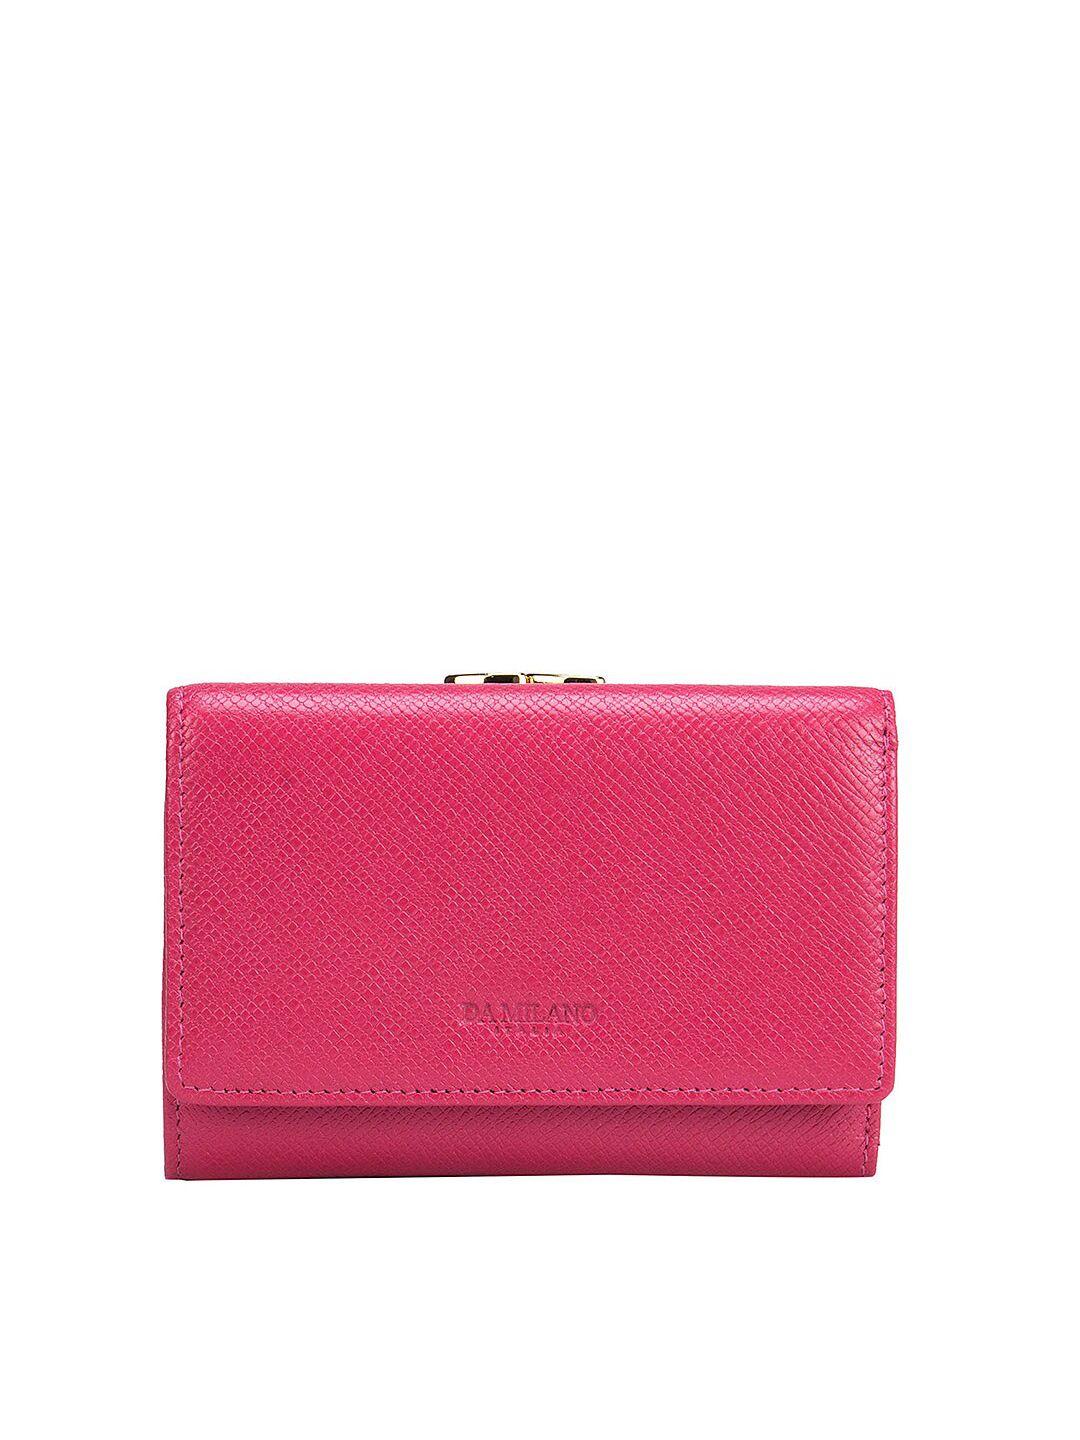 da milano women pink textured leather two fold wallet